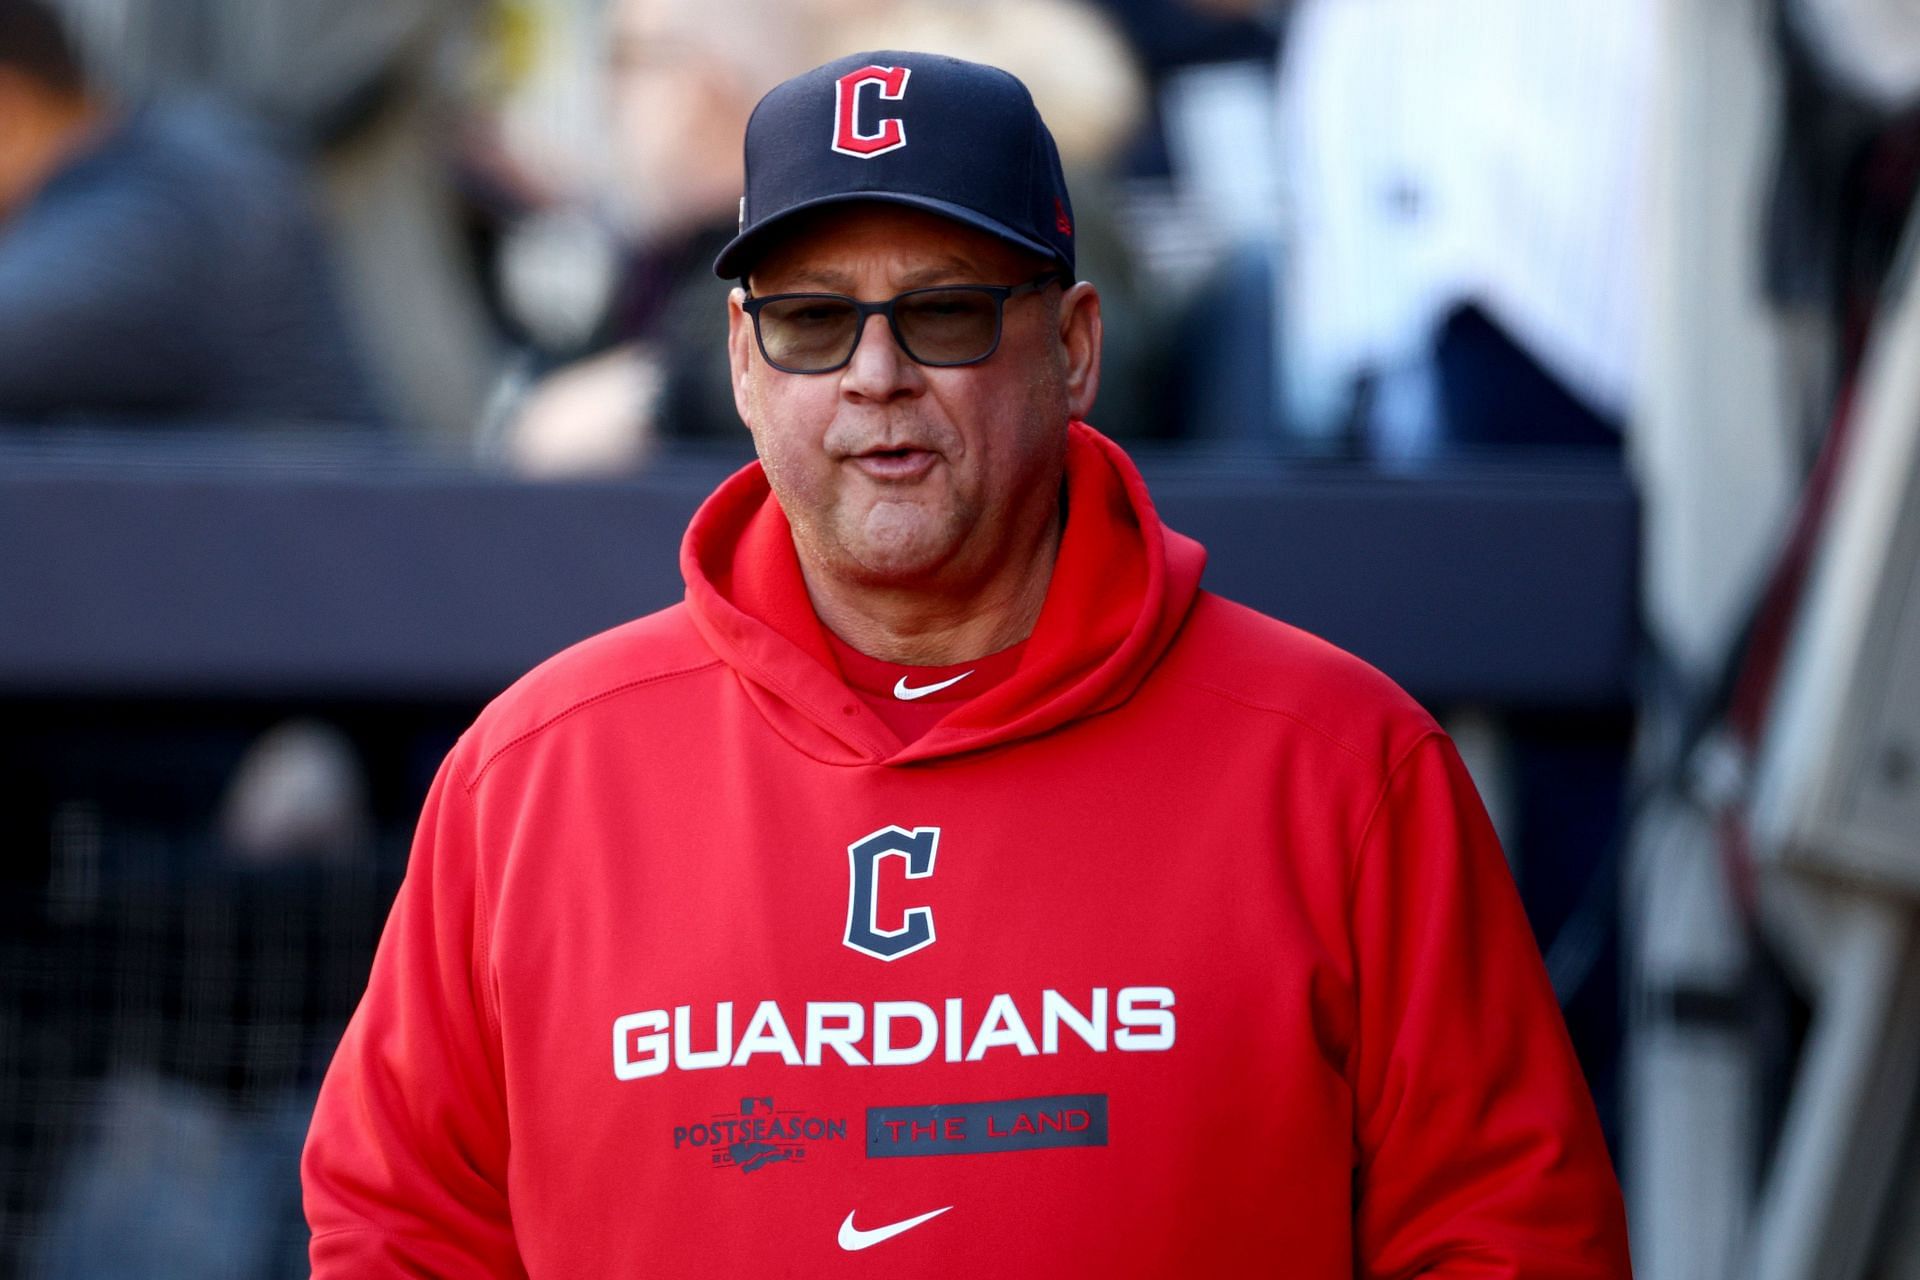 MLB Twitter on Cleveland Guardians manager Terry Francona "He is